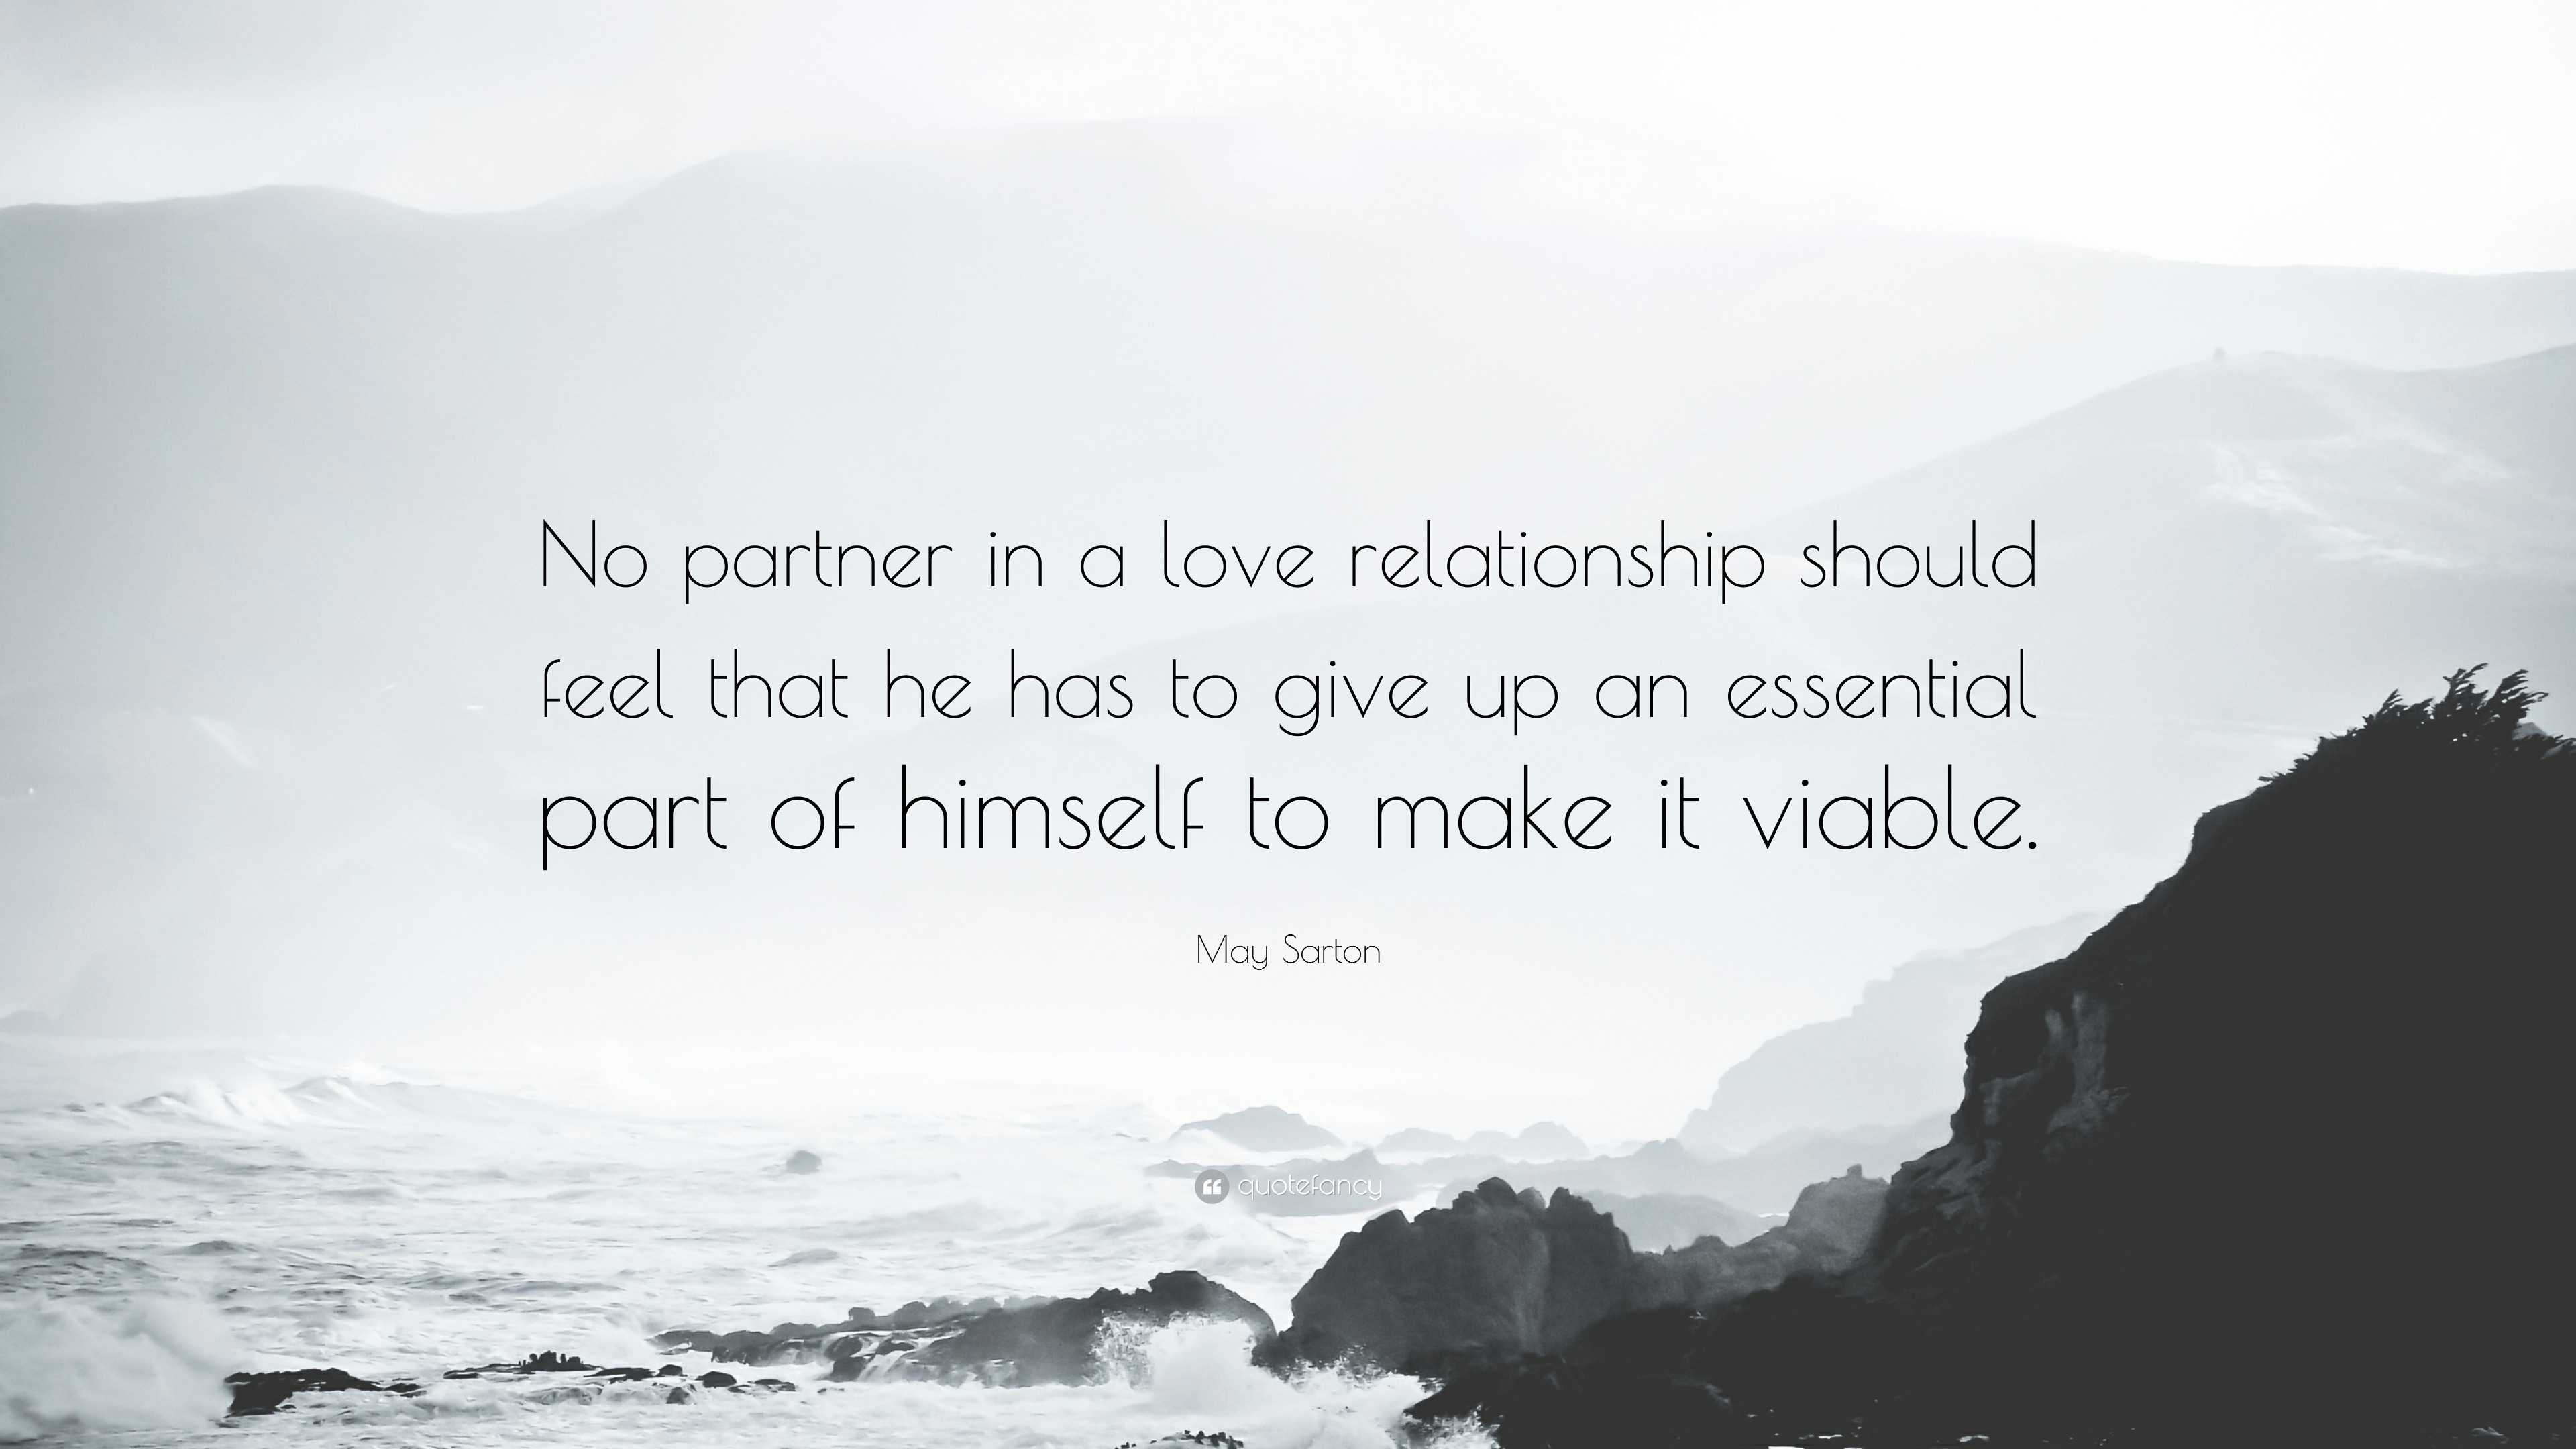 quotes about not giving up on a relationship